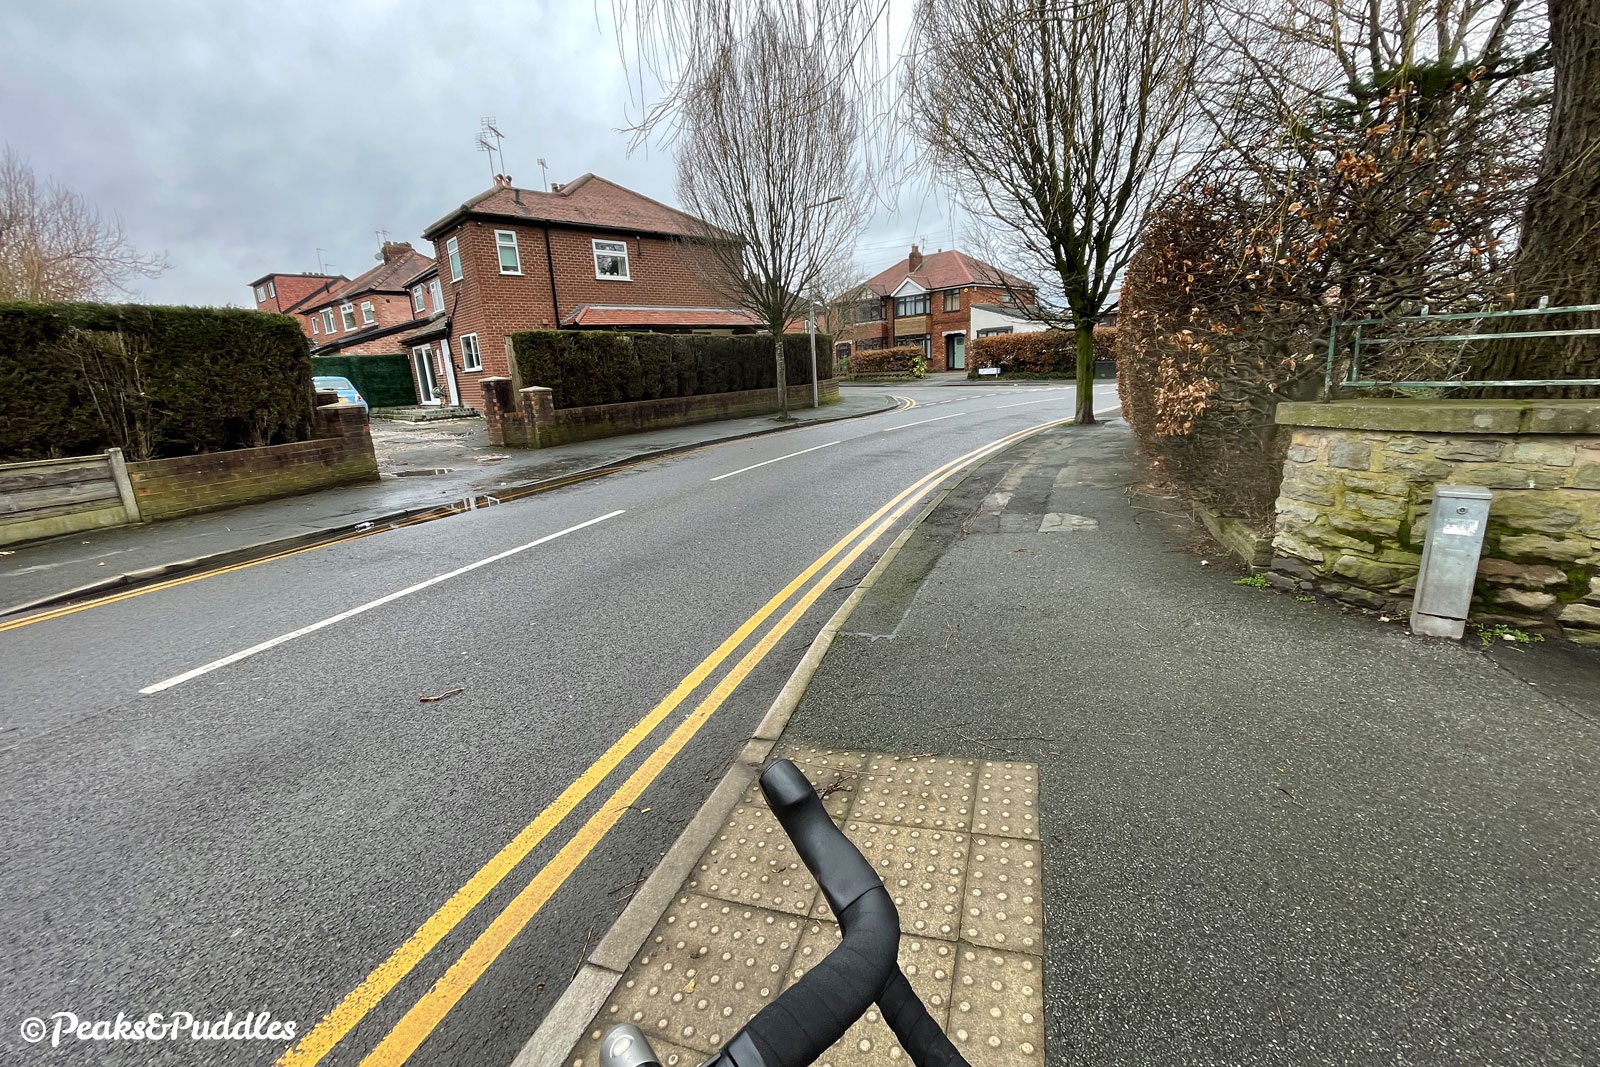 A blind turn onto a road from a cycle path.